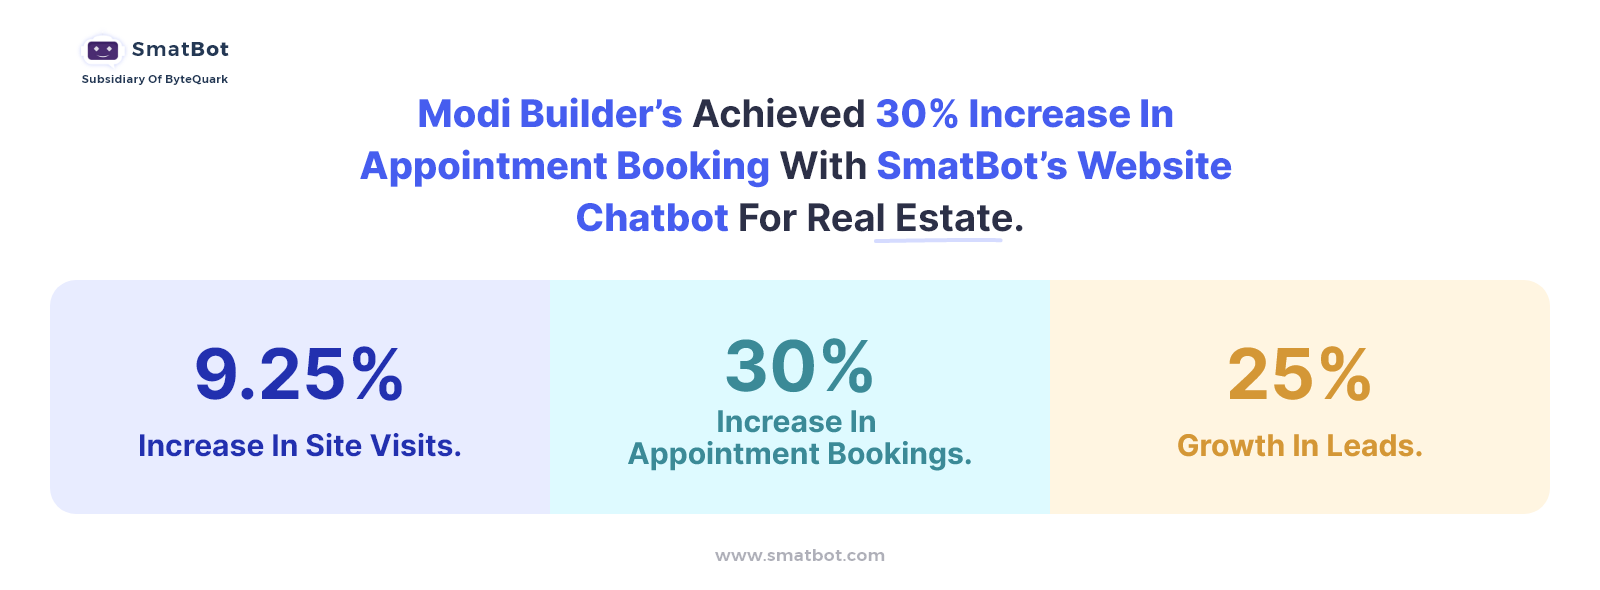 chatbot_impact_on_realestate